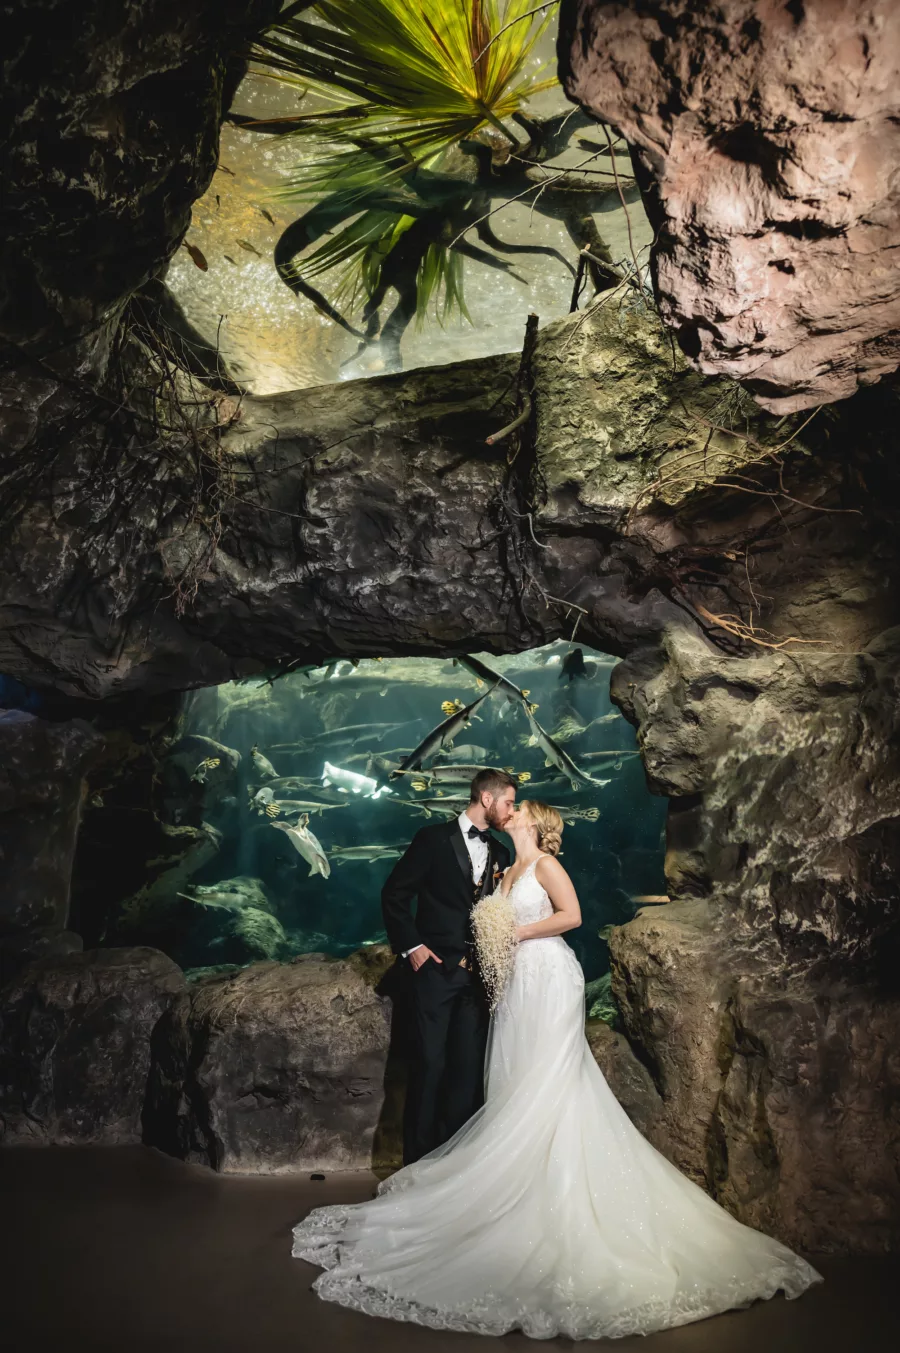 Bride and Groom Just Married Coral Reef Gallery Wedding Portrait | Tampa Bay Event Venue The Florida Aquarium